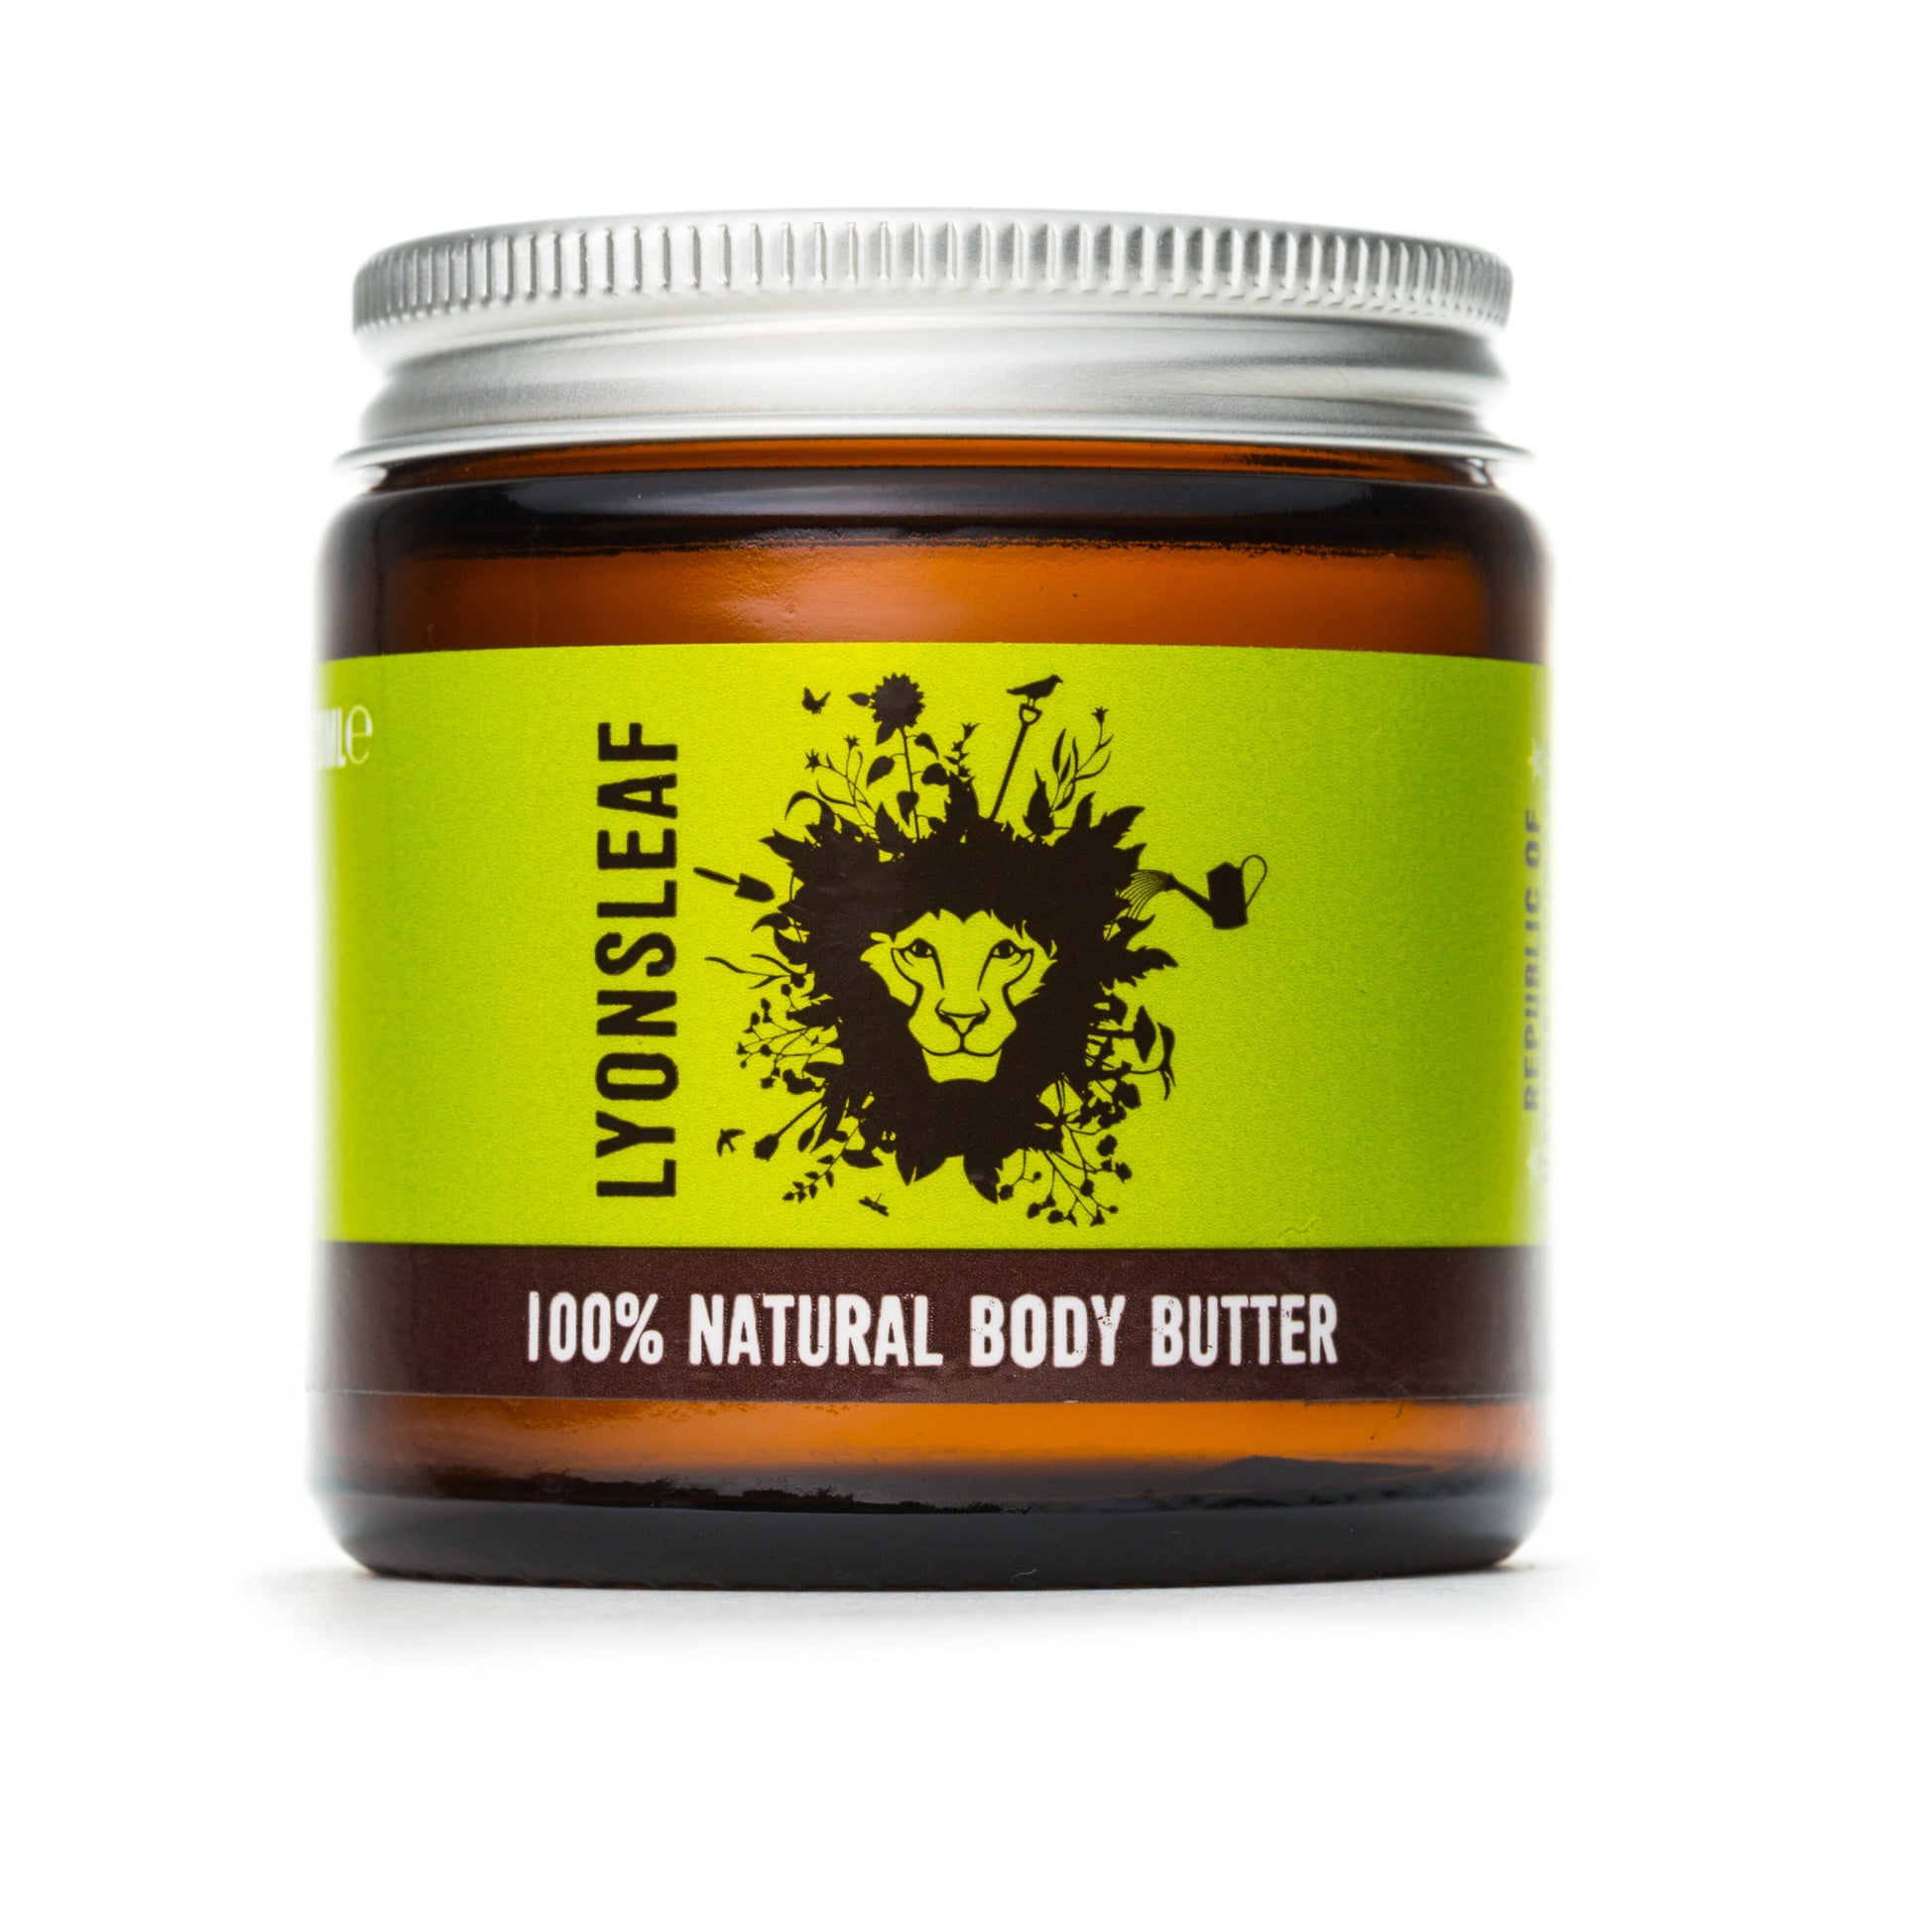 lyonsleaf body butter in an amber glass jar with aluminium lid and a lime green label that reads 'lyonsleaf 100% natural body butter'